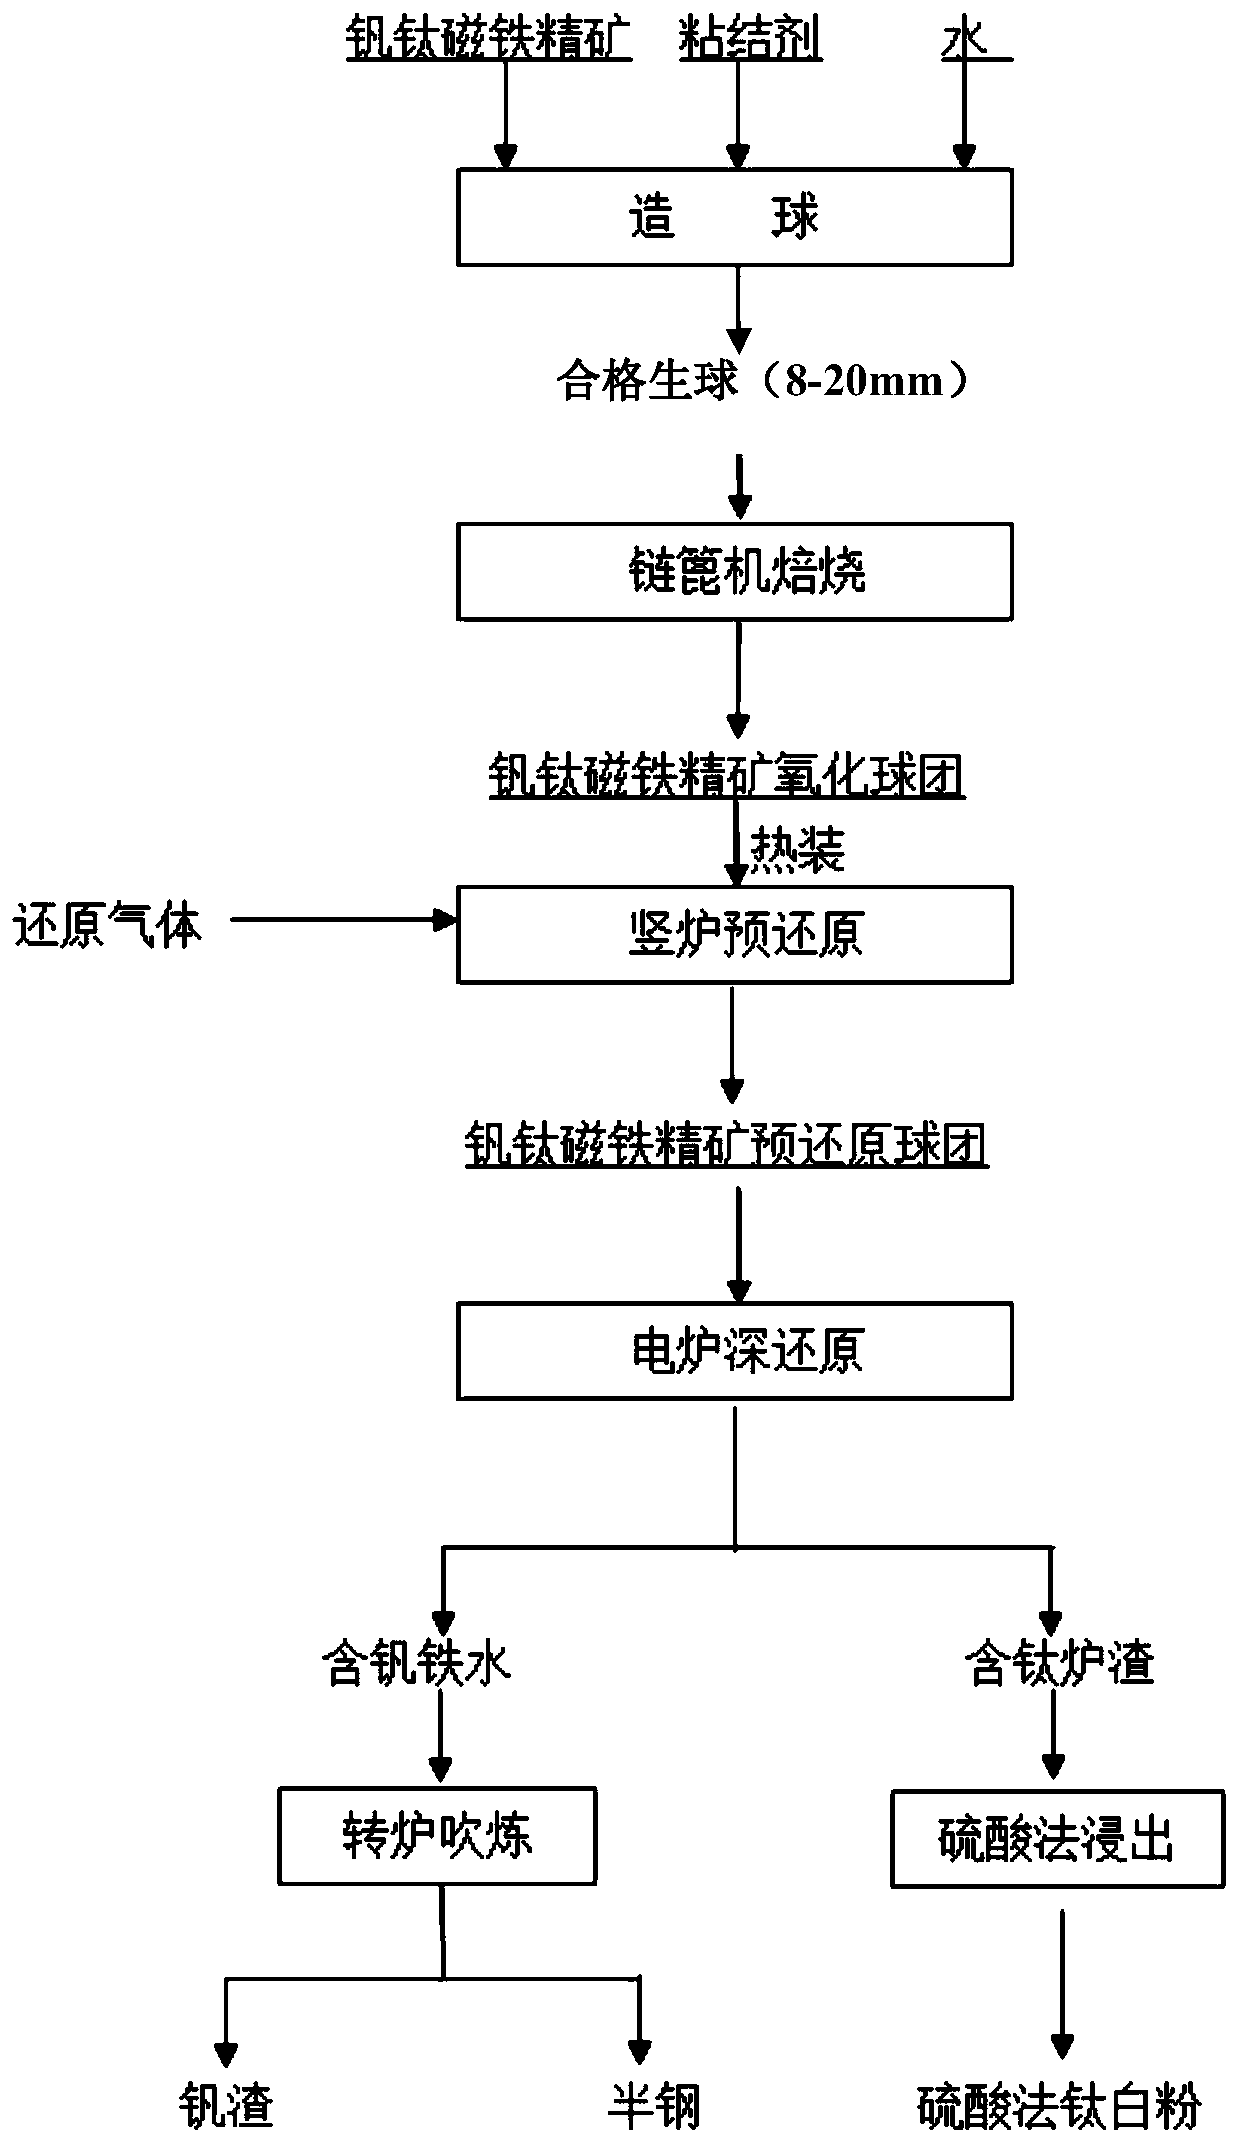 Process for comprehensively utilizing vanadium-titanium magnetite through chain grate roasting, gas-based shaft furnace prereduction, and electric furnace deep reduction